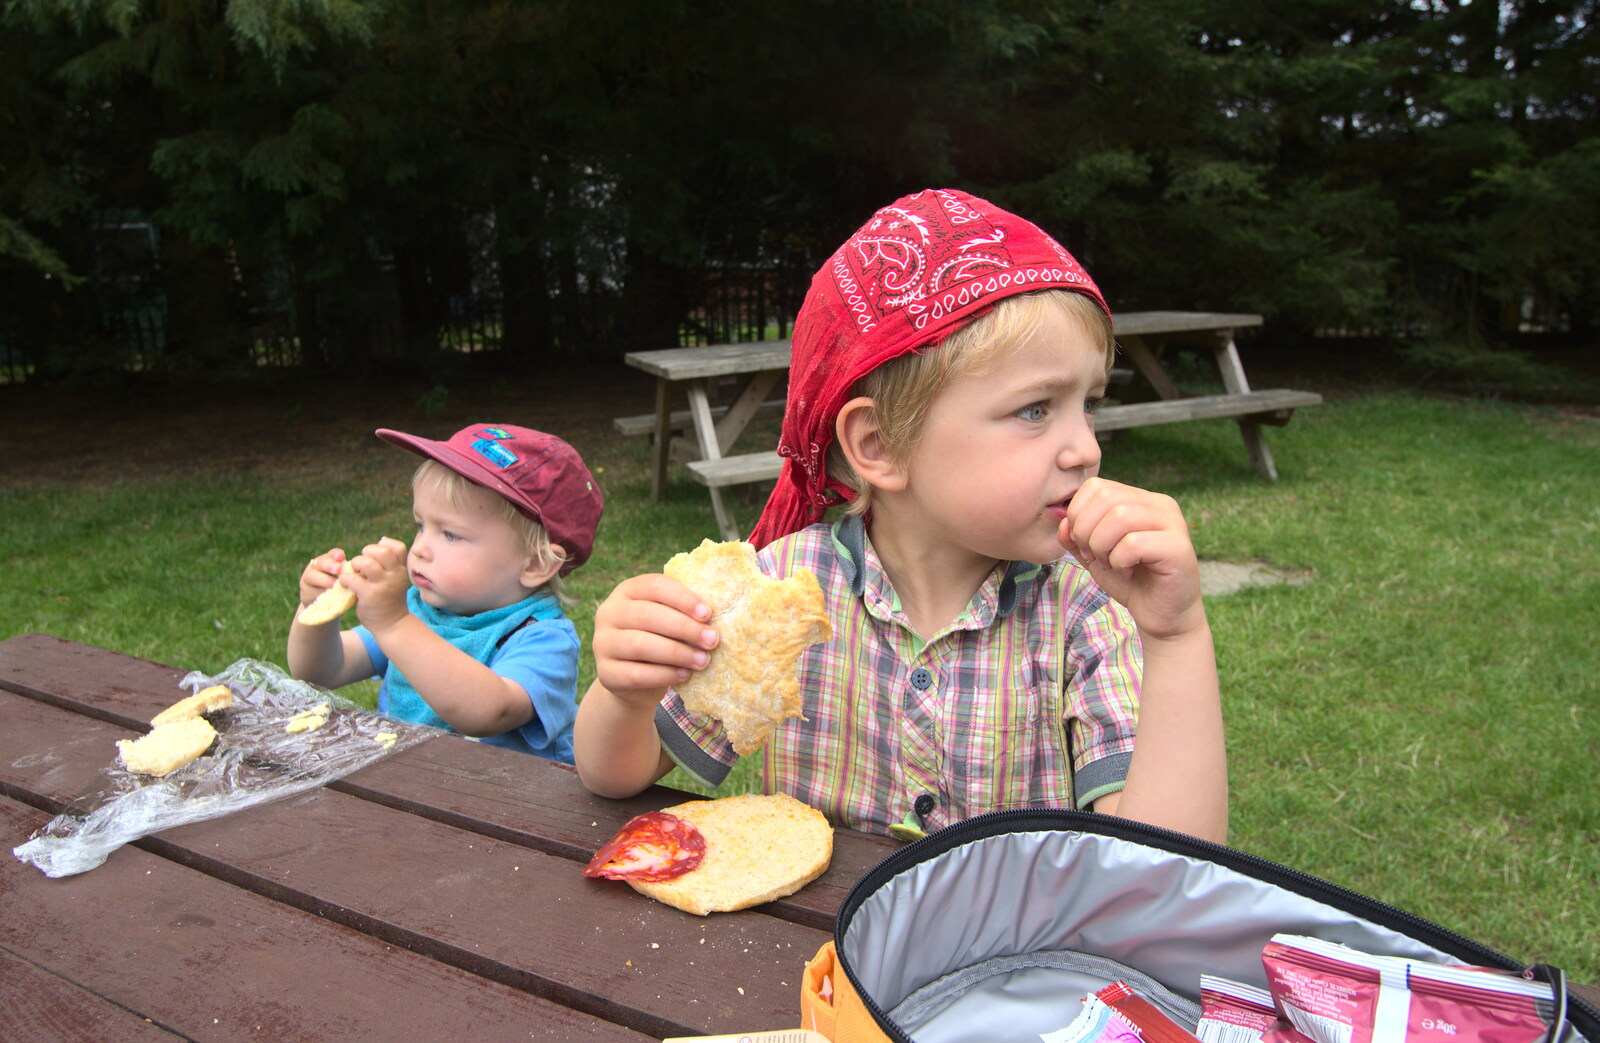 Harry and Fred eat their picnic from Tiger Cubs at Banham Zoo, Banham, Norfolk - 6th August 2013